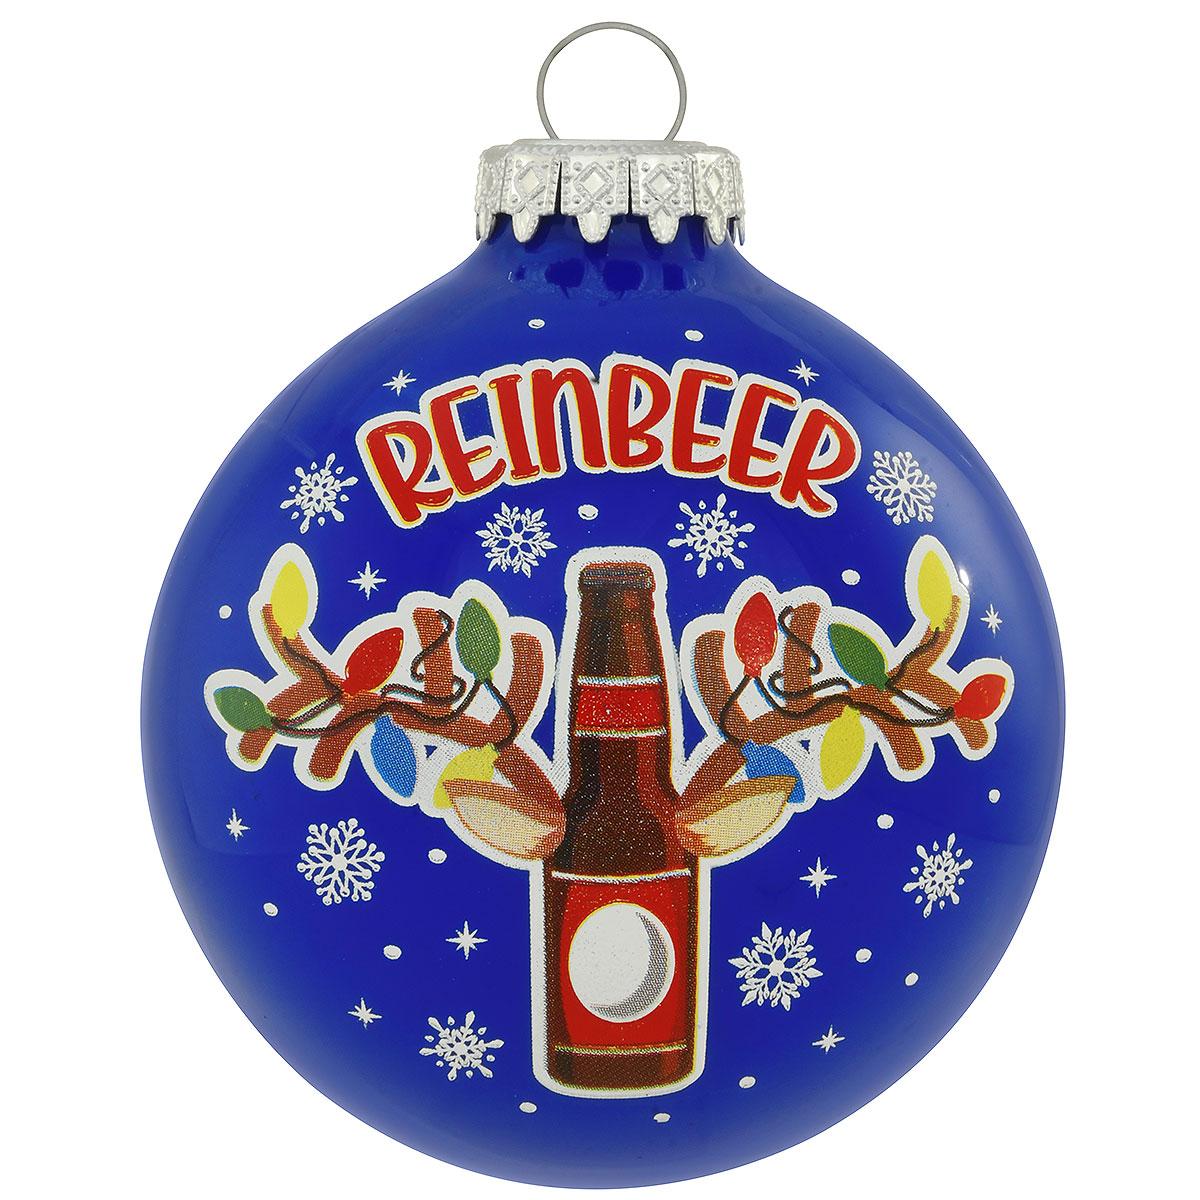 Reinbeer Glass Ornament